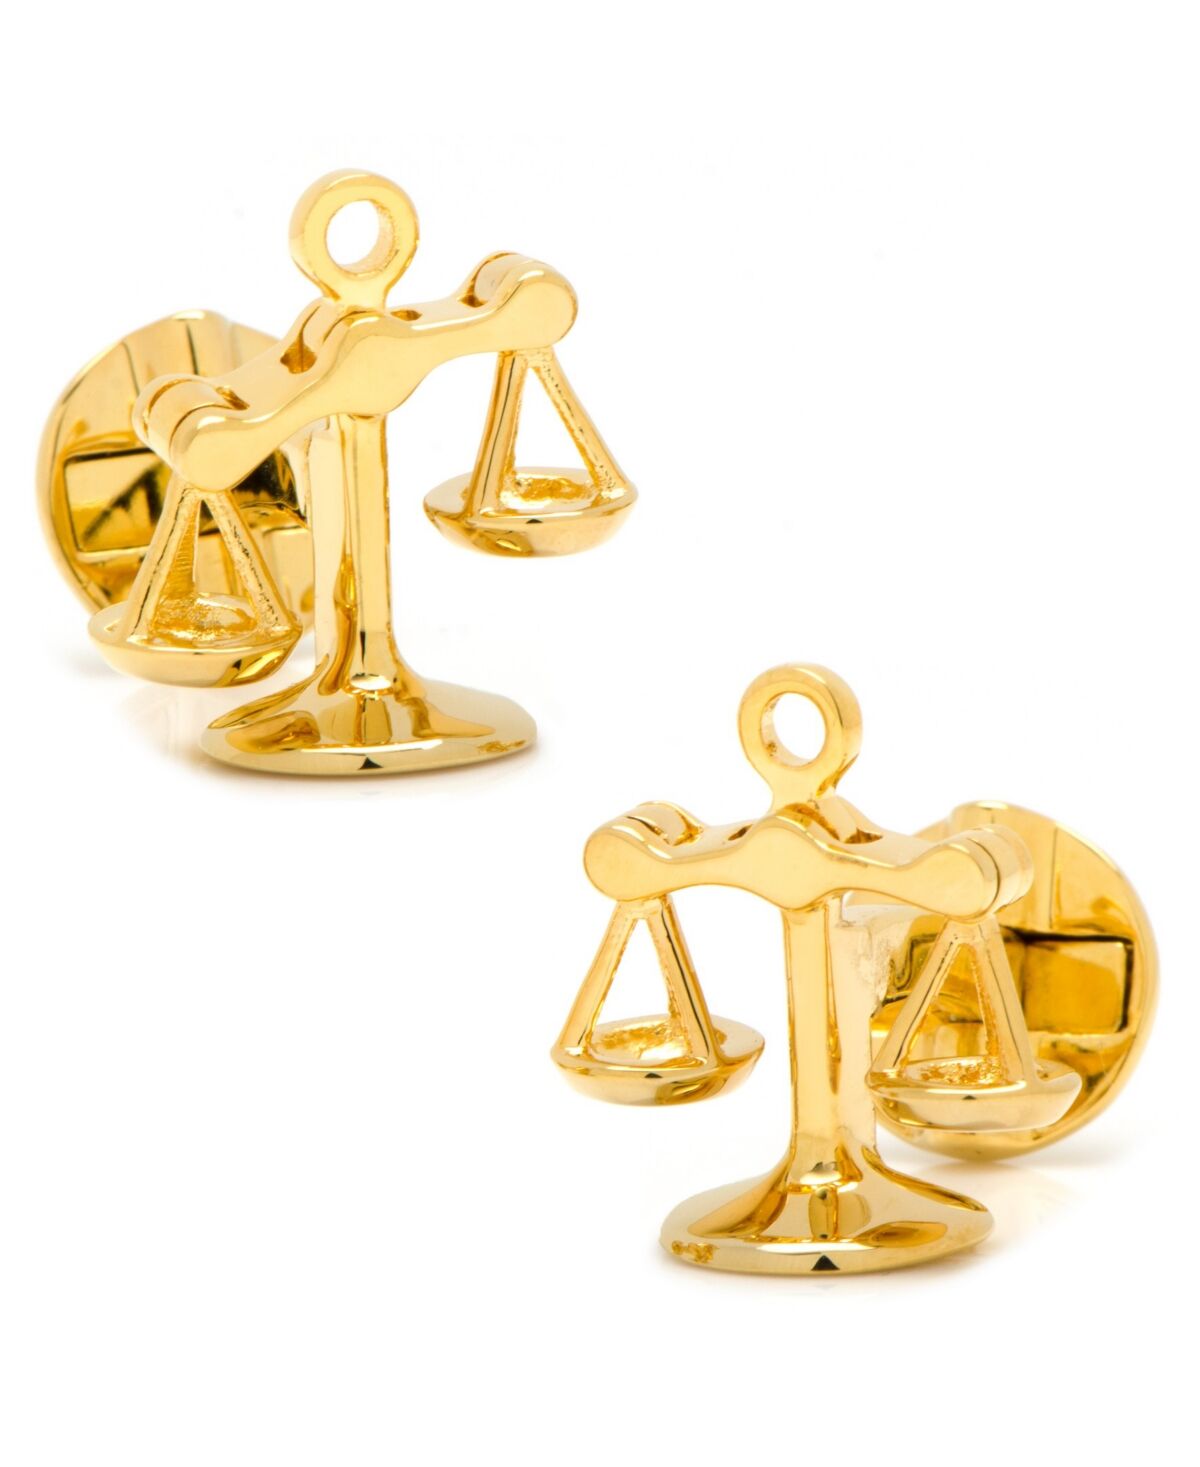 Cufflinks Inc. Moving Parts Scales of Justice Cufflinks - Gold